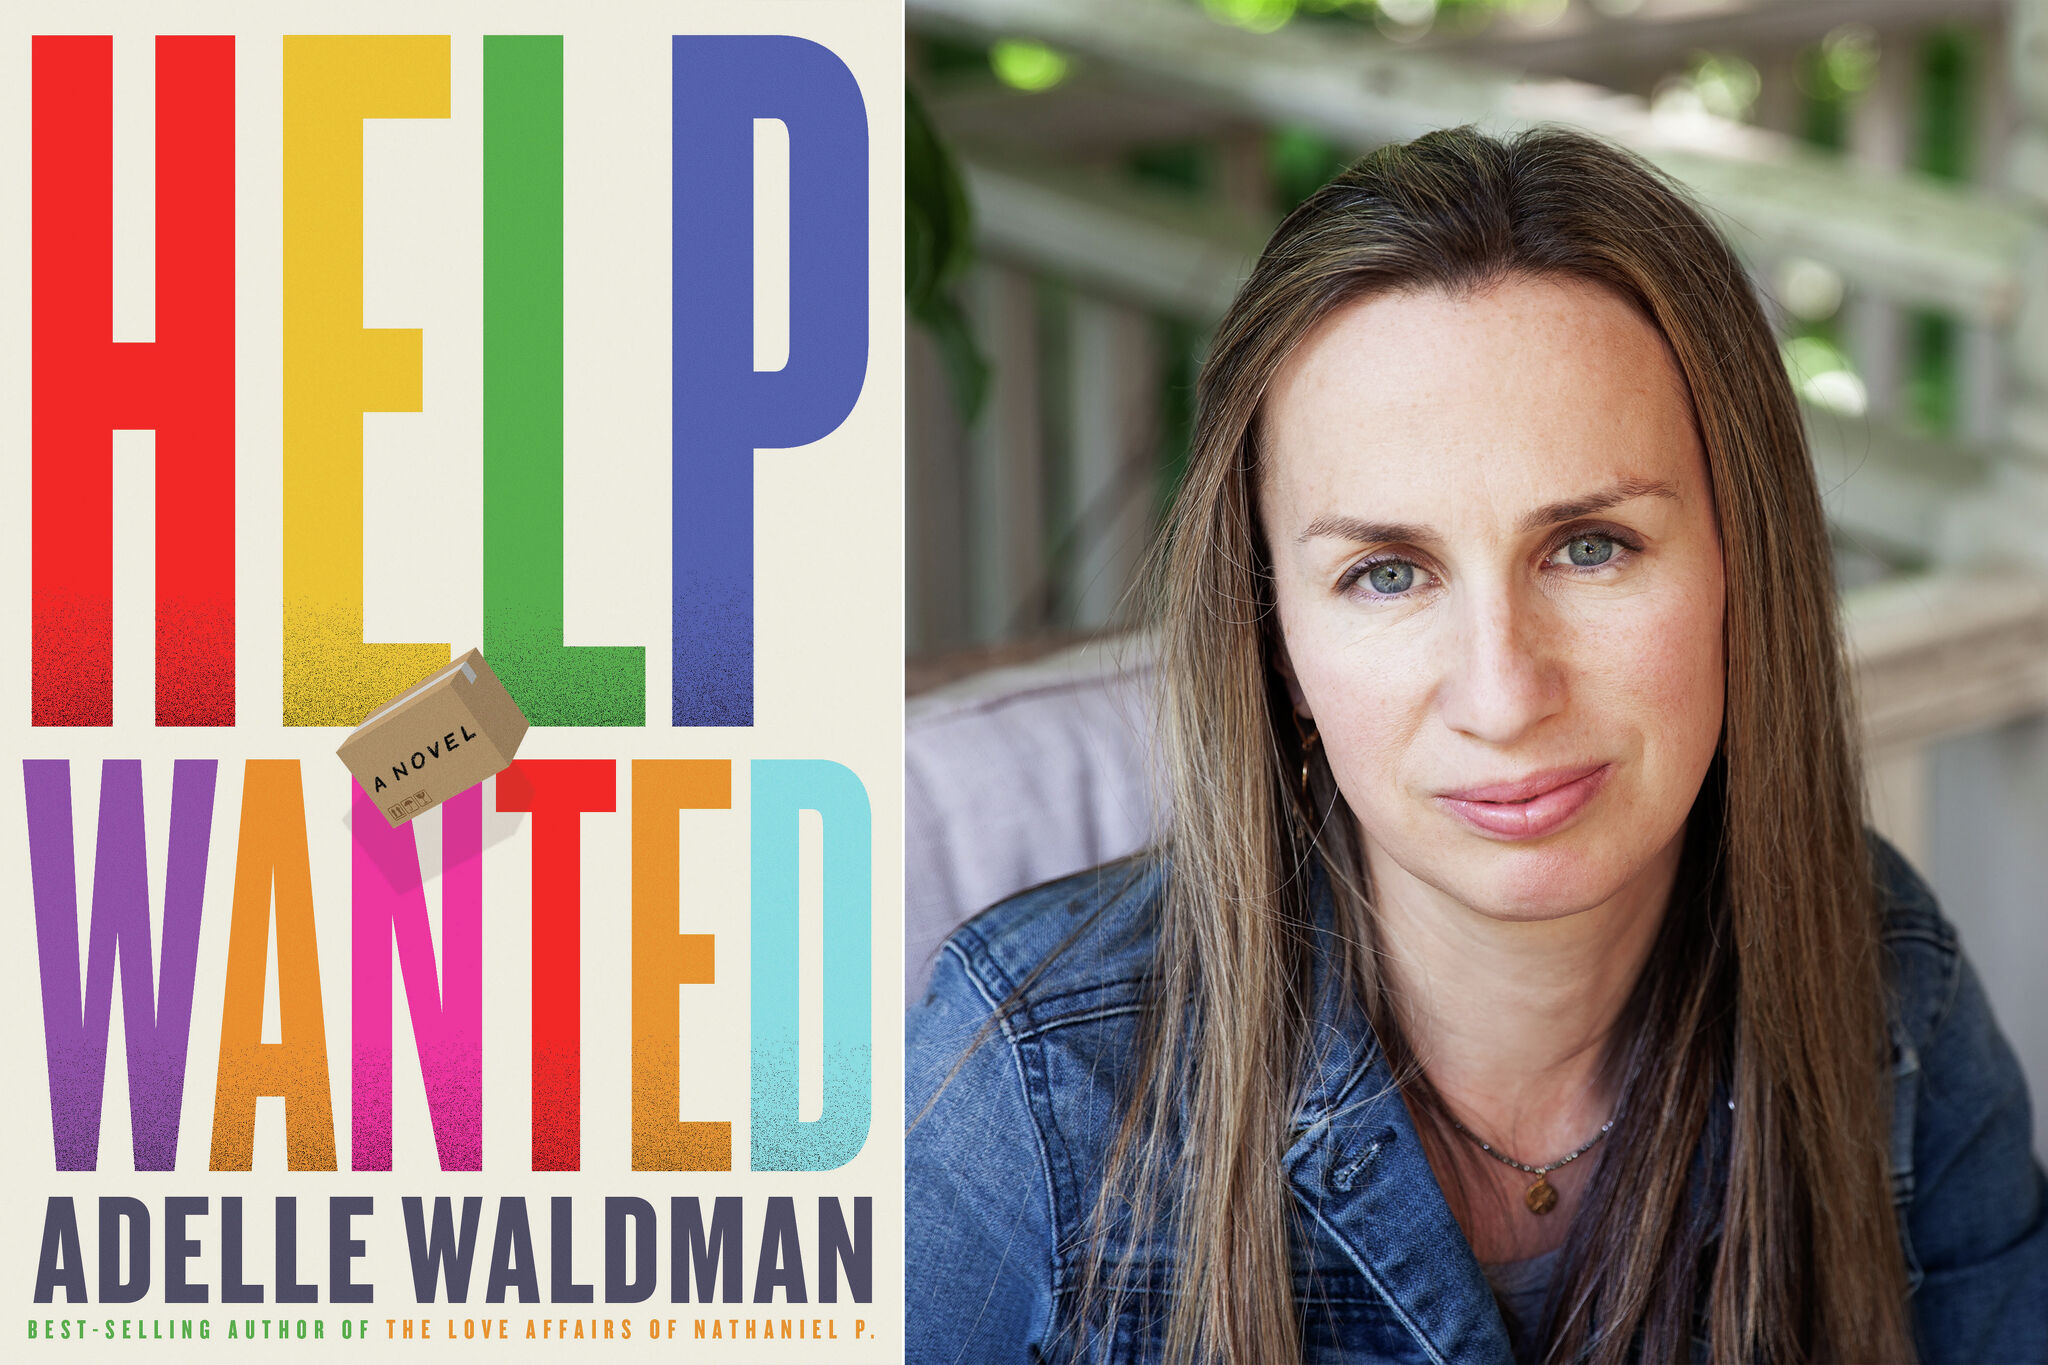 Adelle Waldman on 'Help Wanted,' her funny, dark novel about work